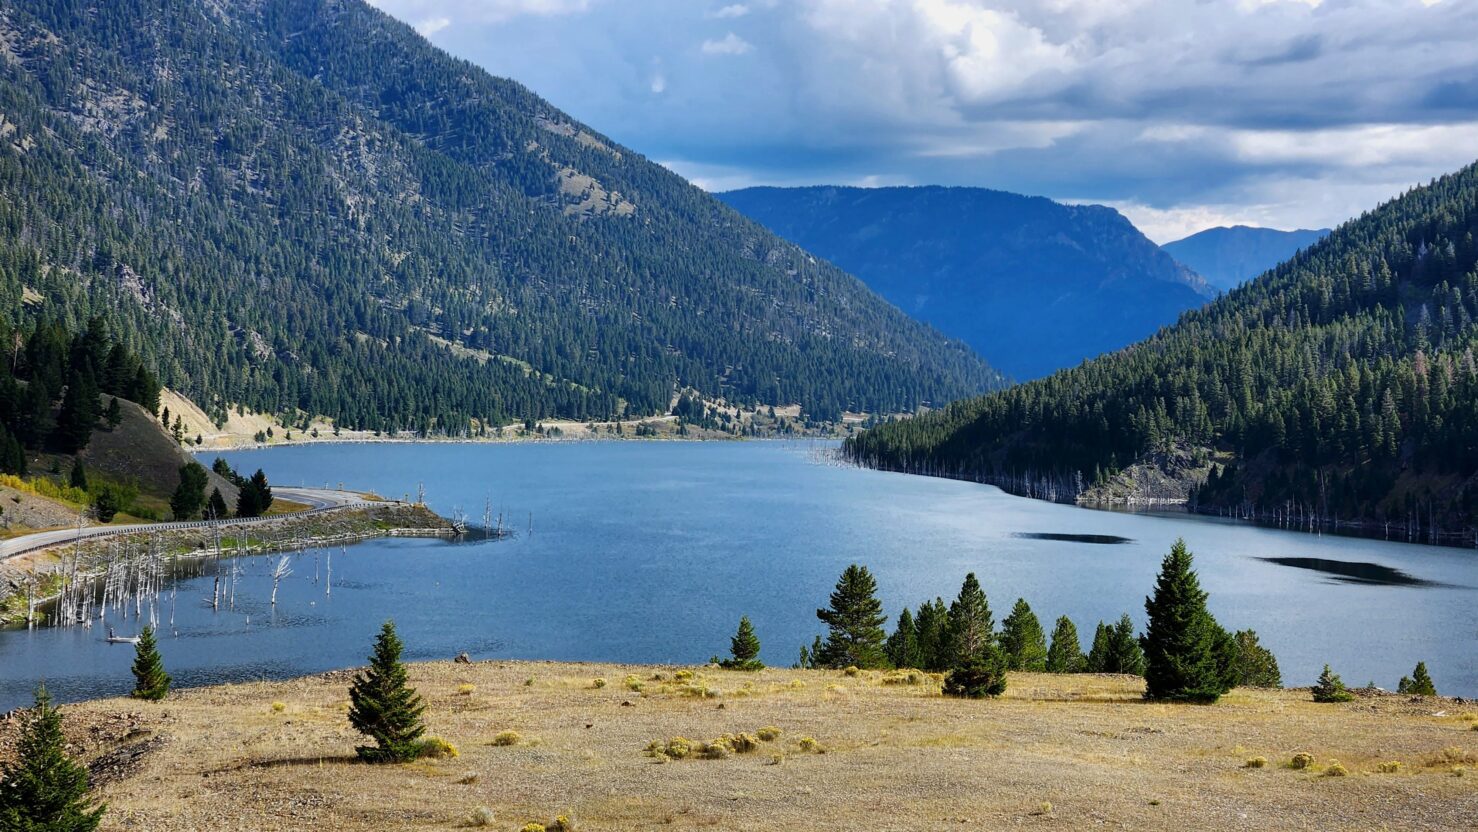 Earthquake Lake is a result of damming of the Madison River.